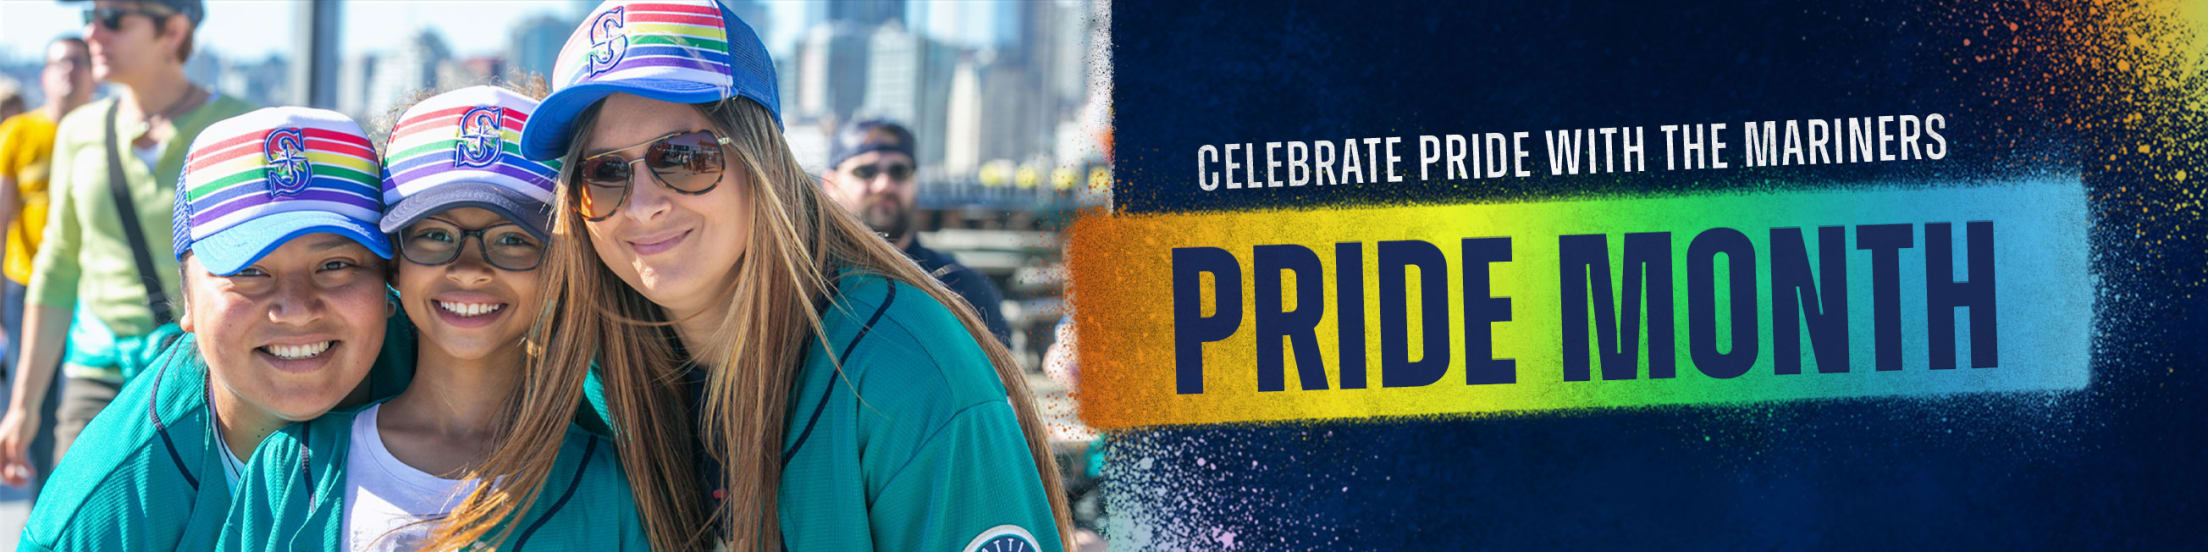 Celebrating Pride with the Mariners